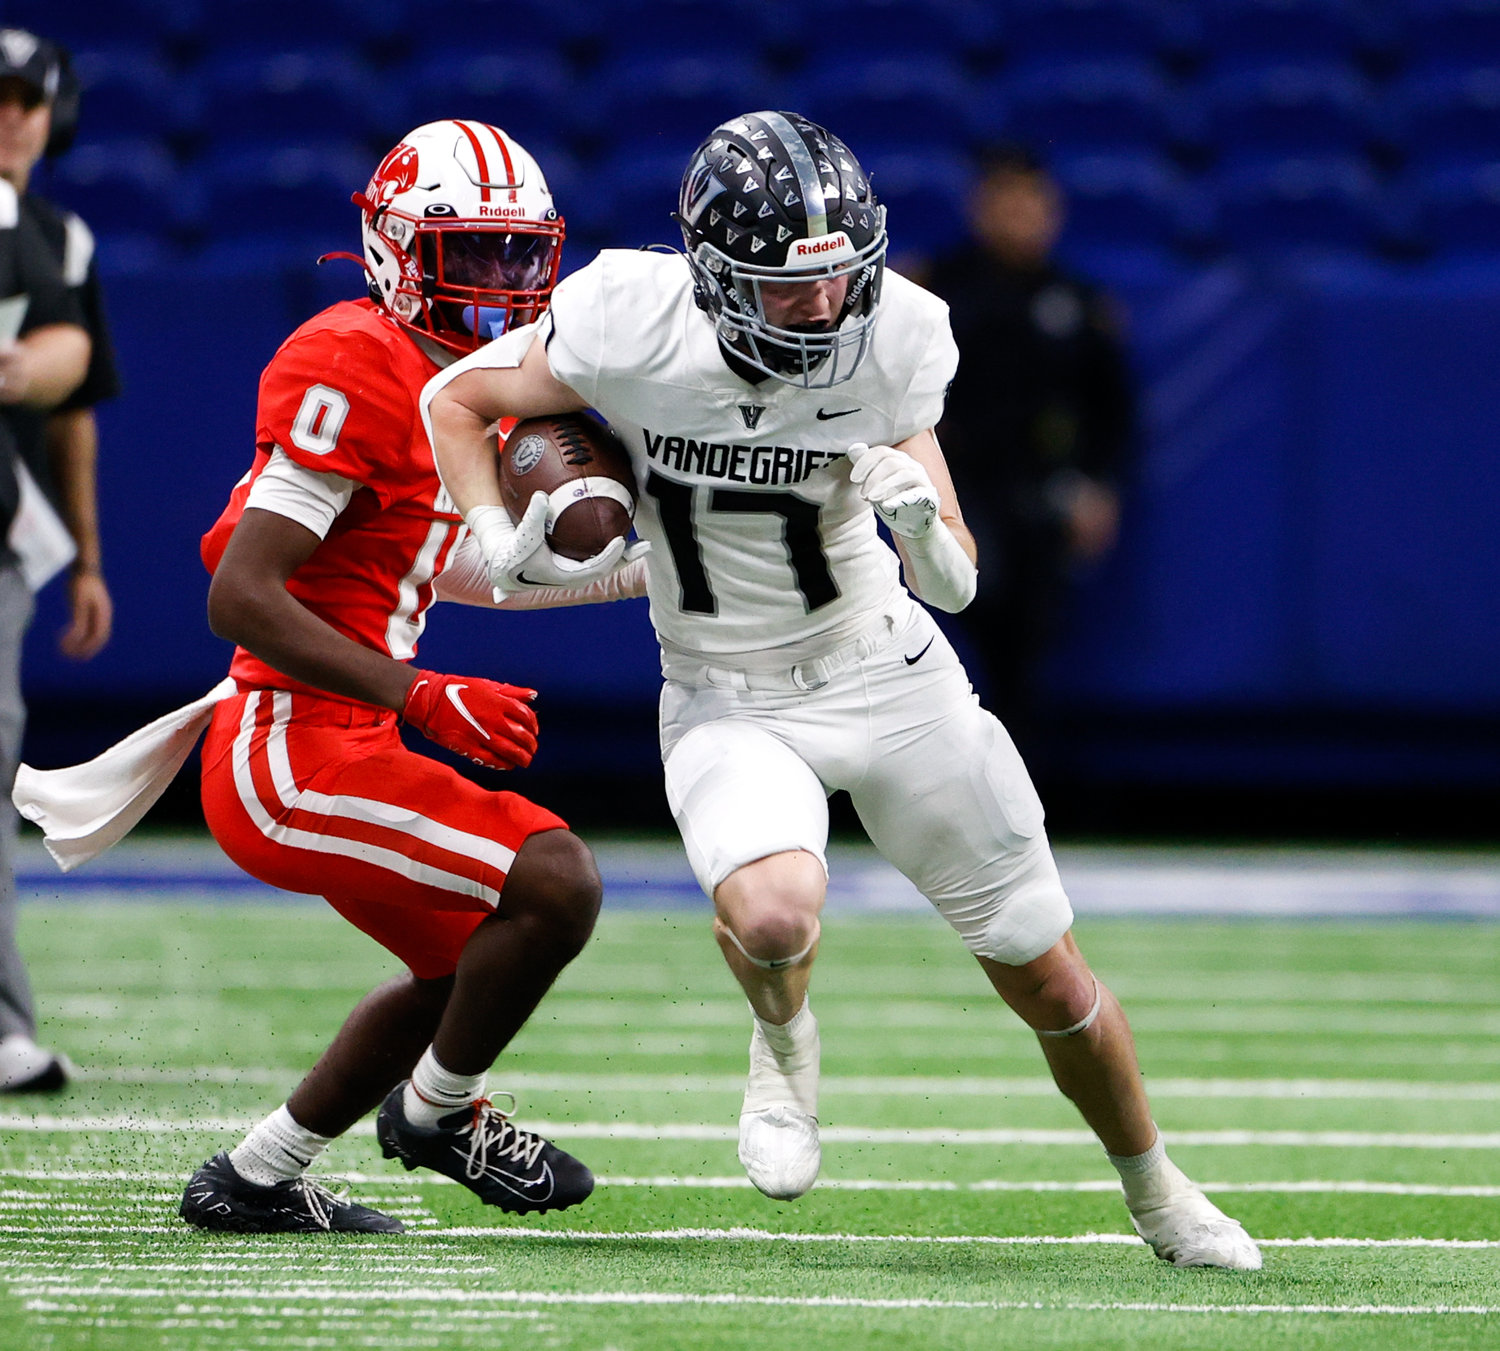 Vandegrift Vipers senior wide receiver Beck Ormond (17) carries the ball after a catch during the Class 6A-DII state semifinal football game between Katy and Vandegrift on Dec. 10, 2022 in San Antonio.